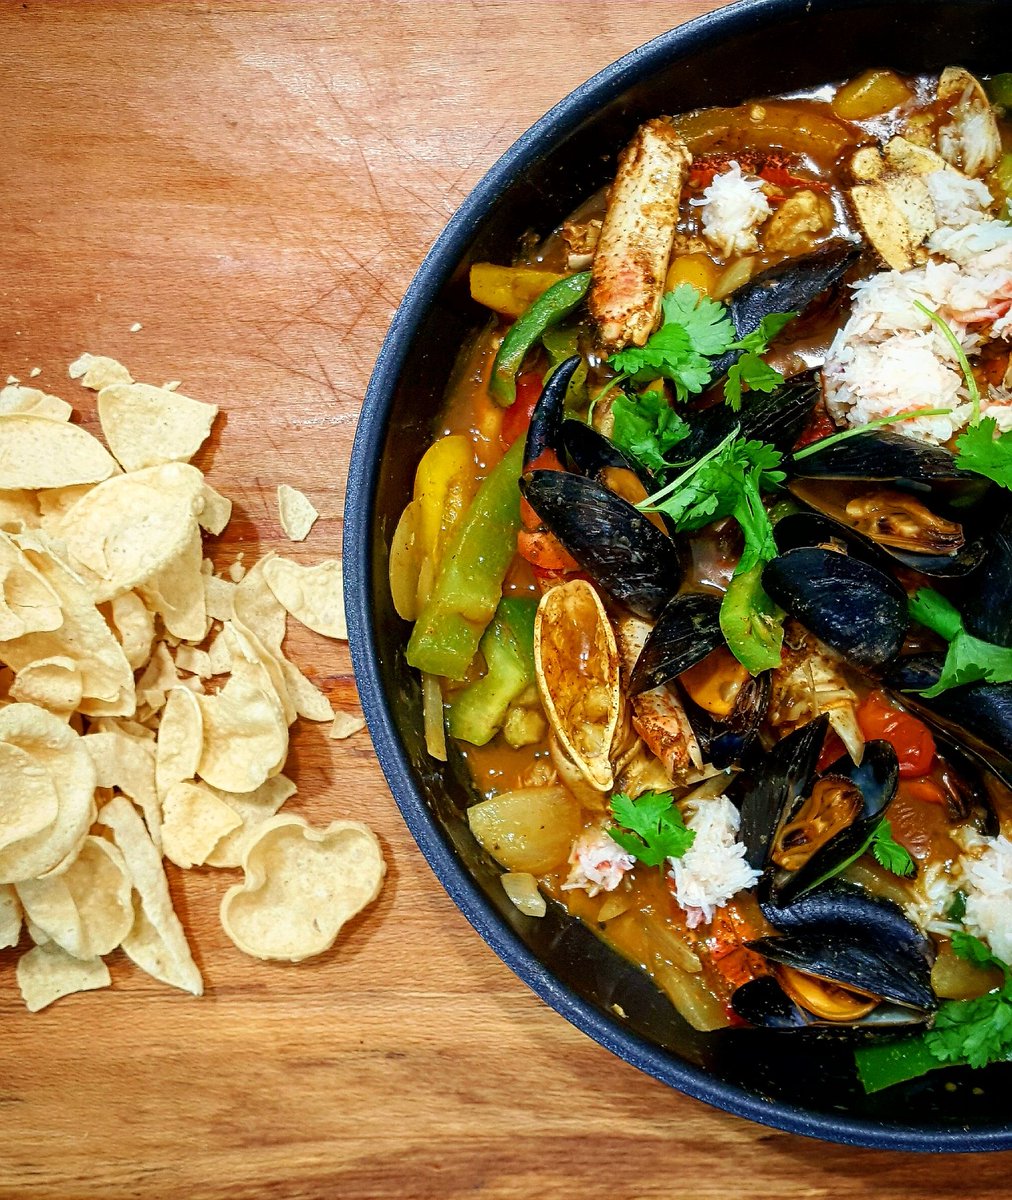 Cant beat a warming seafood curry with some amazing UK Mussels and Fish.
#seafoodweek #mussels #lovebritishfood #LoveSeafood #ukseafood #BritishFoodisGreat @seafishuk @LoveBritishFood @Crabstockfest